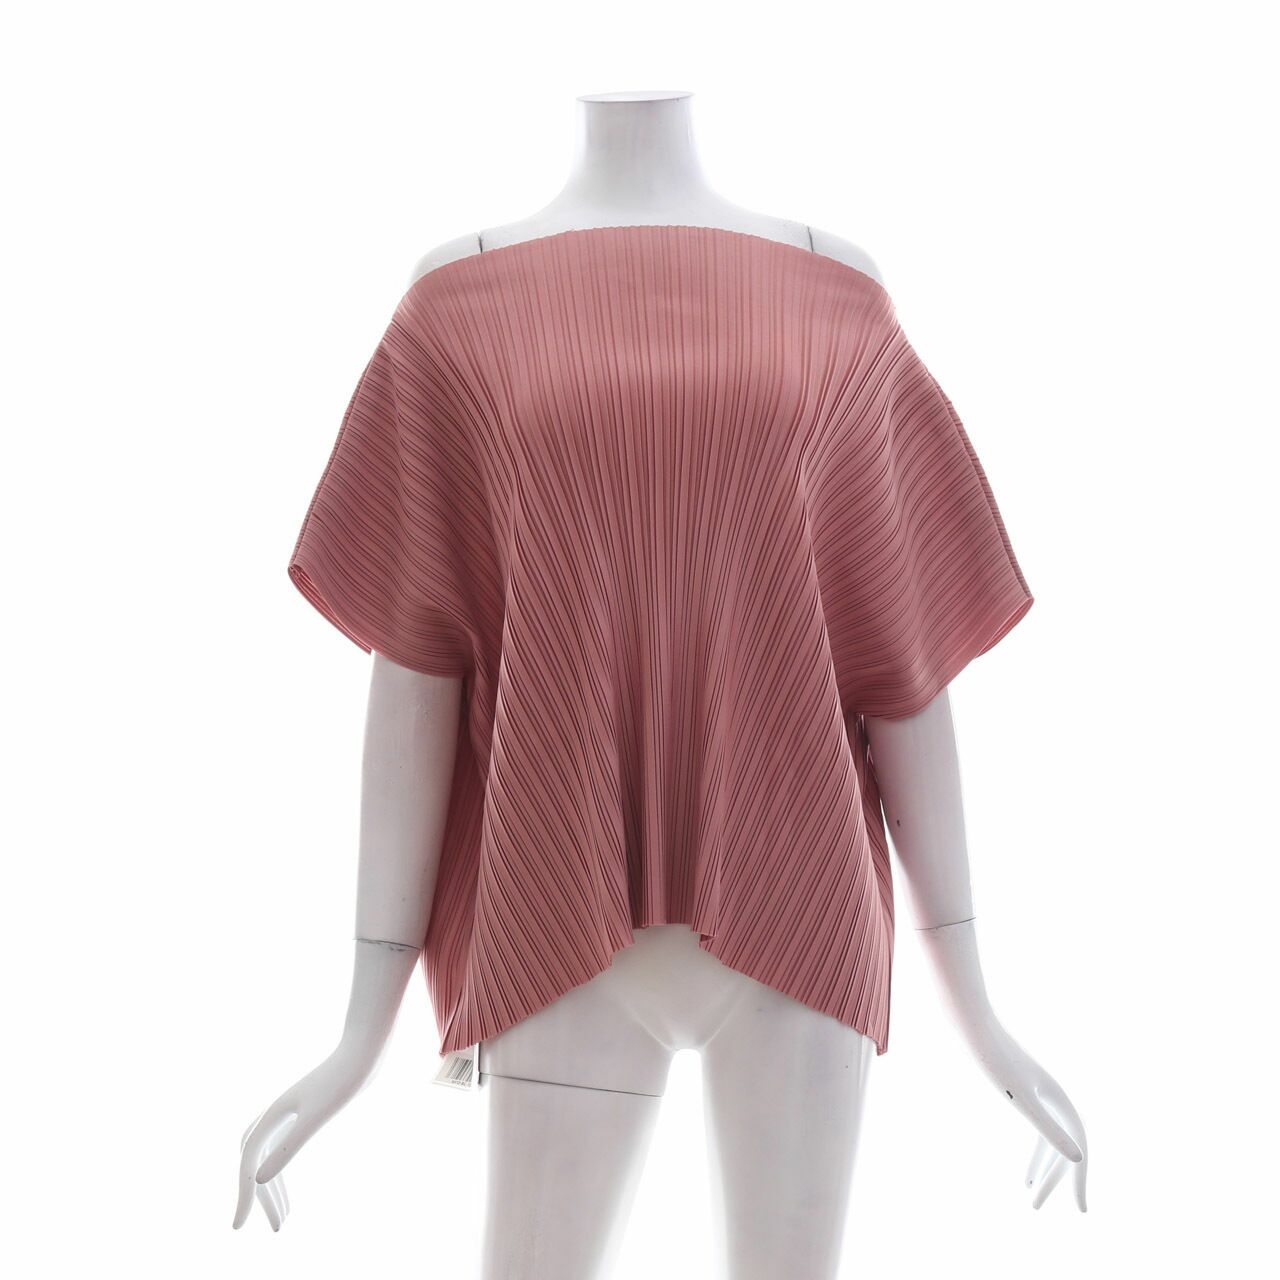 Shop At Velvet Square Pleated Pink Blouse